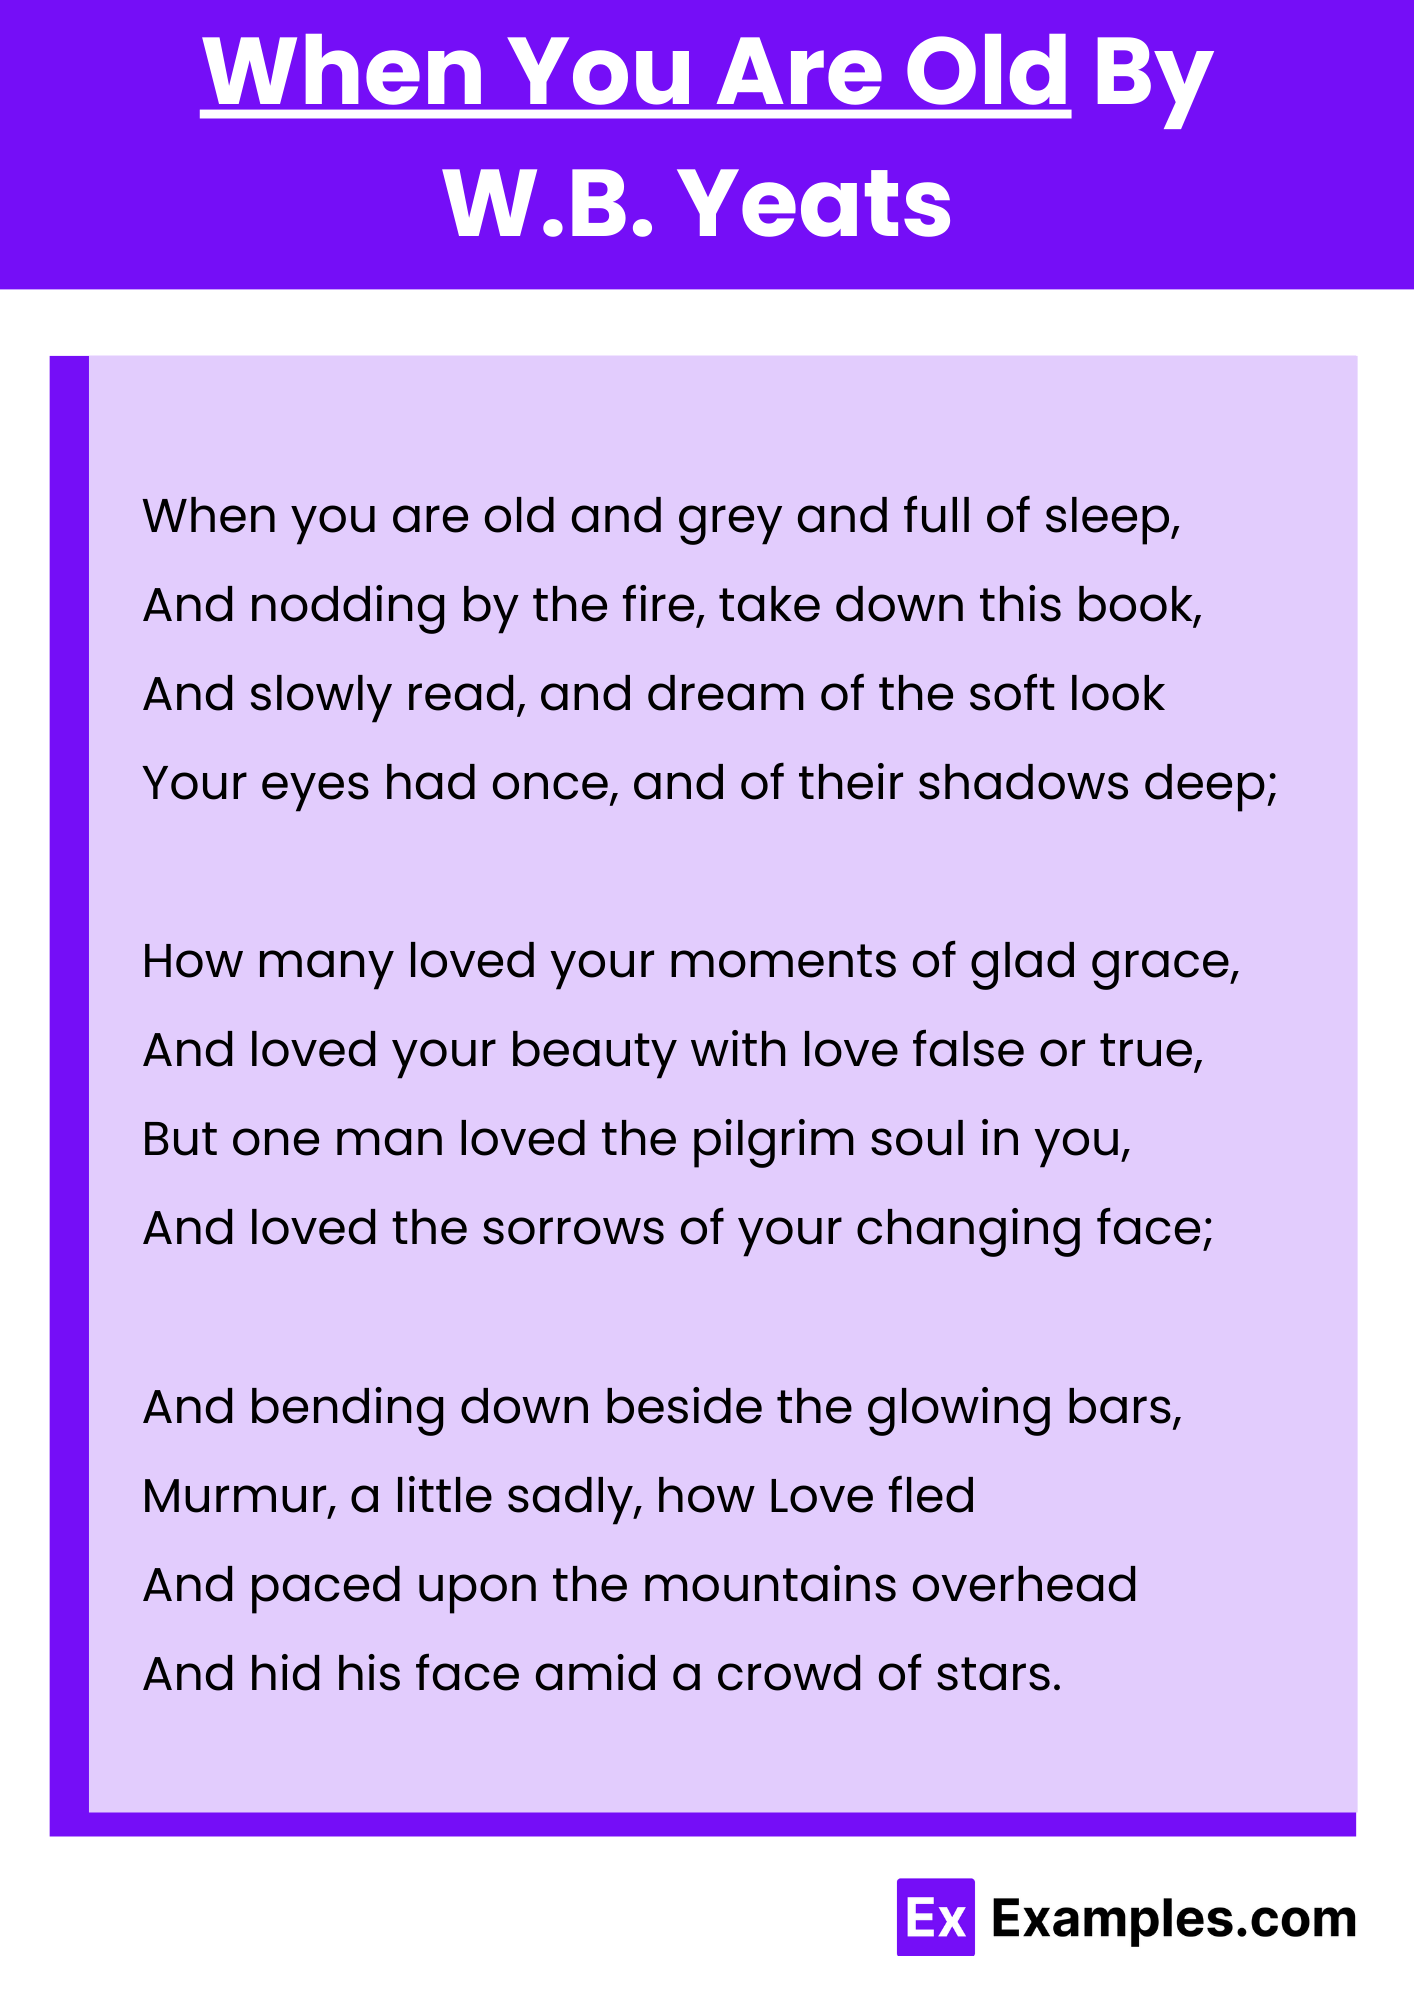 When You Are Old By W.B. Yeats